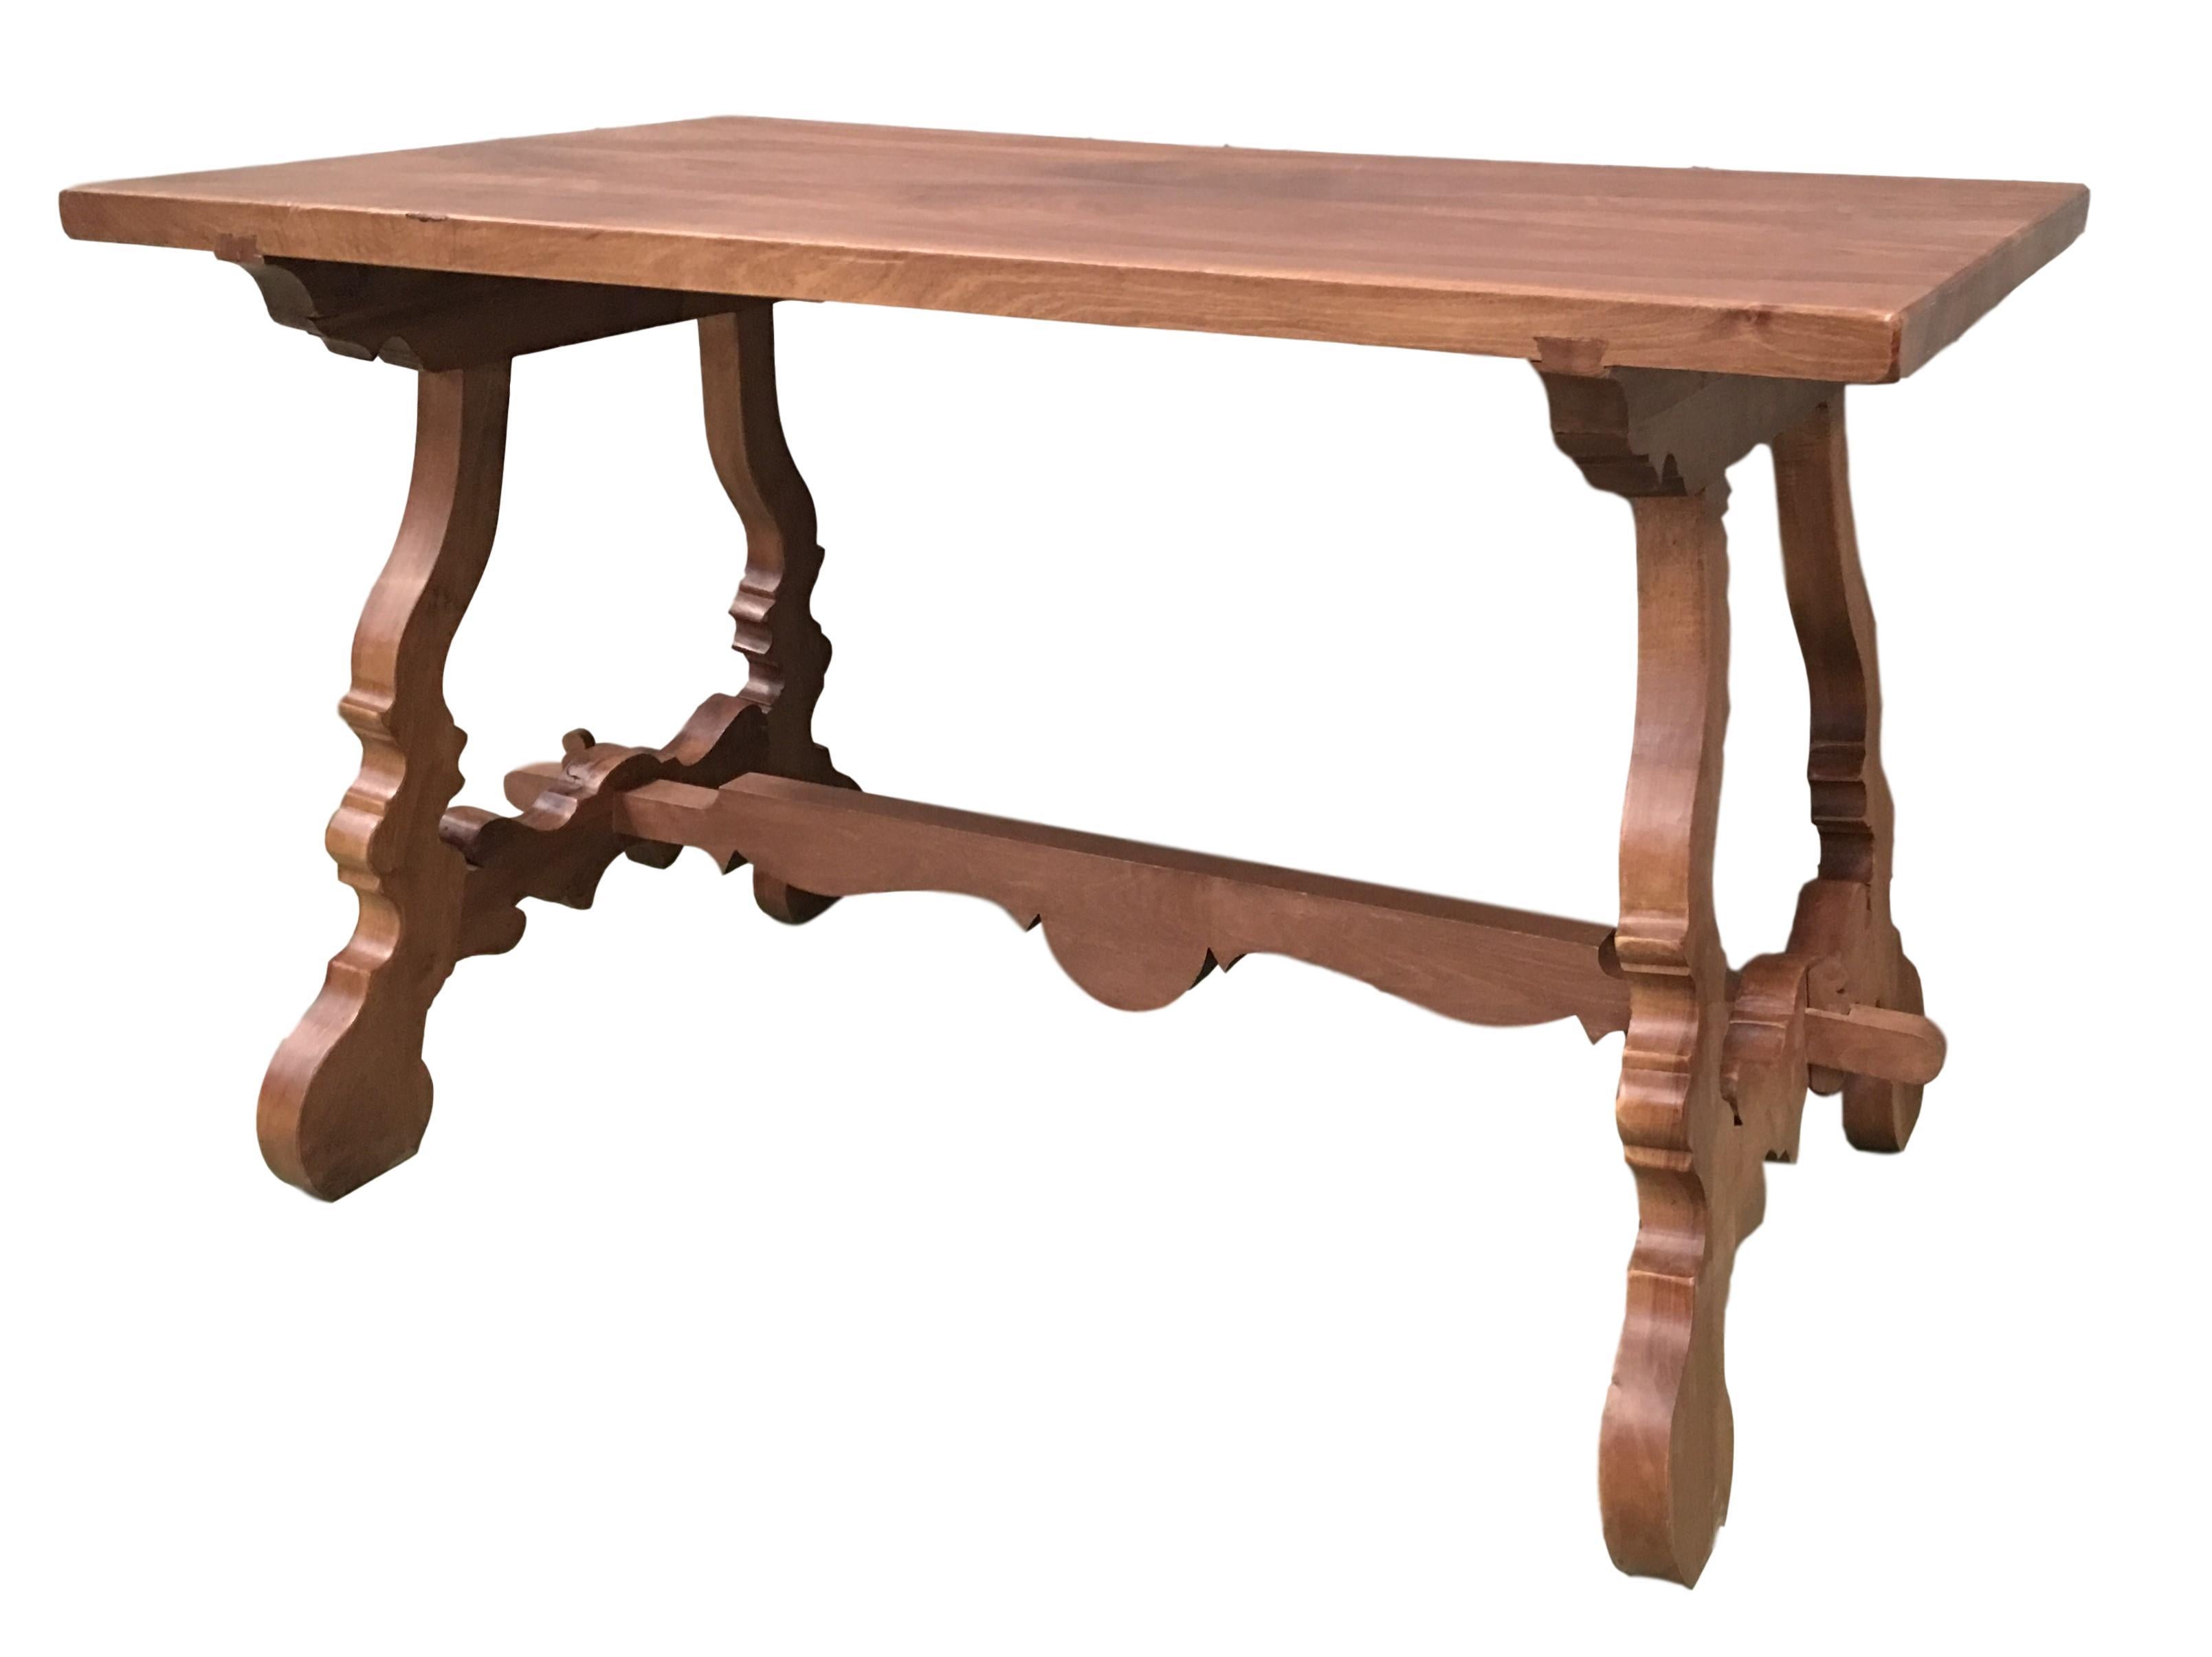 Early 20th century Spanish pine trestle table with wood stretcher.

Ideal for a kitchen.